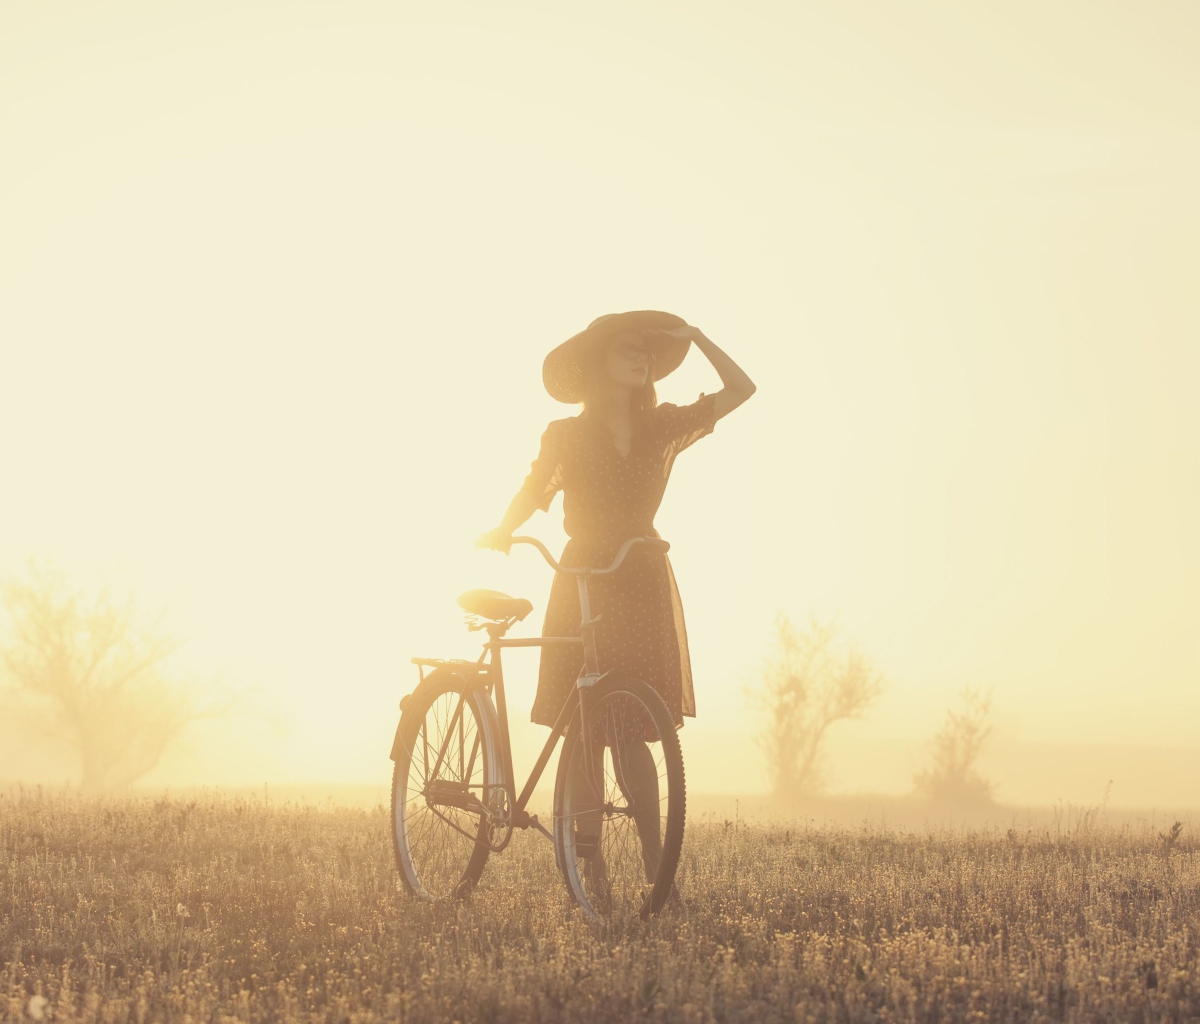 Das Girl And Bicycle On Misty Day Wallpaper 1200x1024